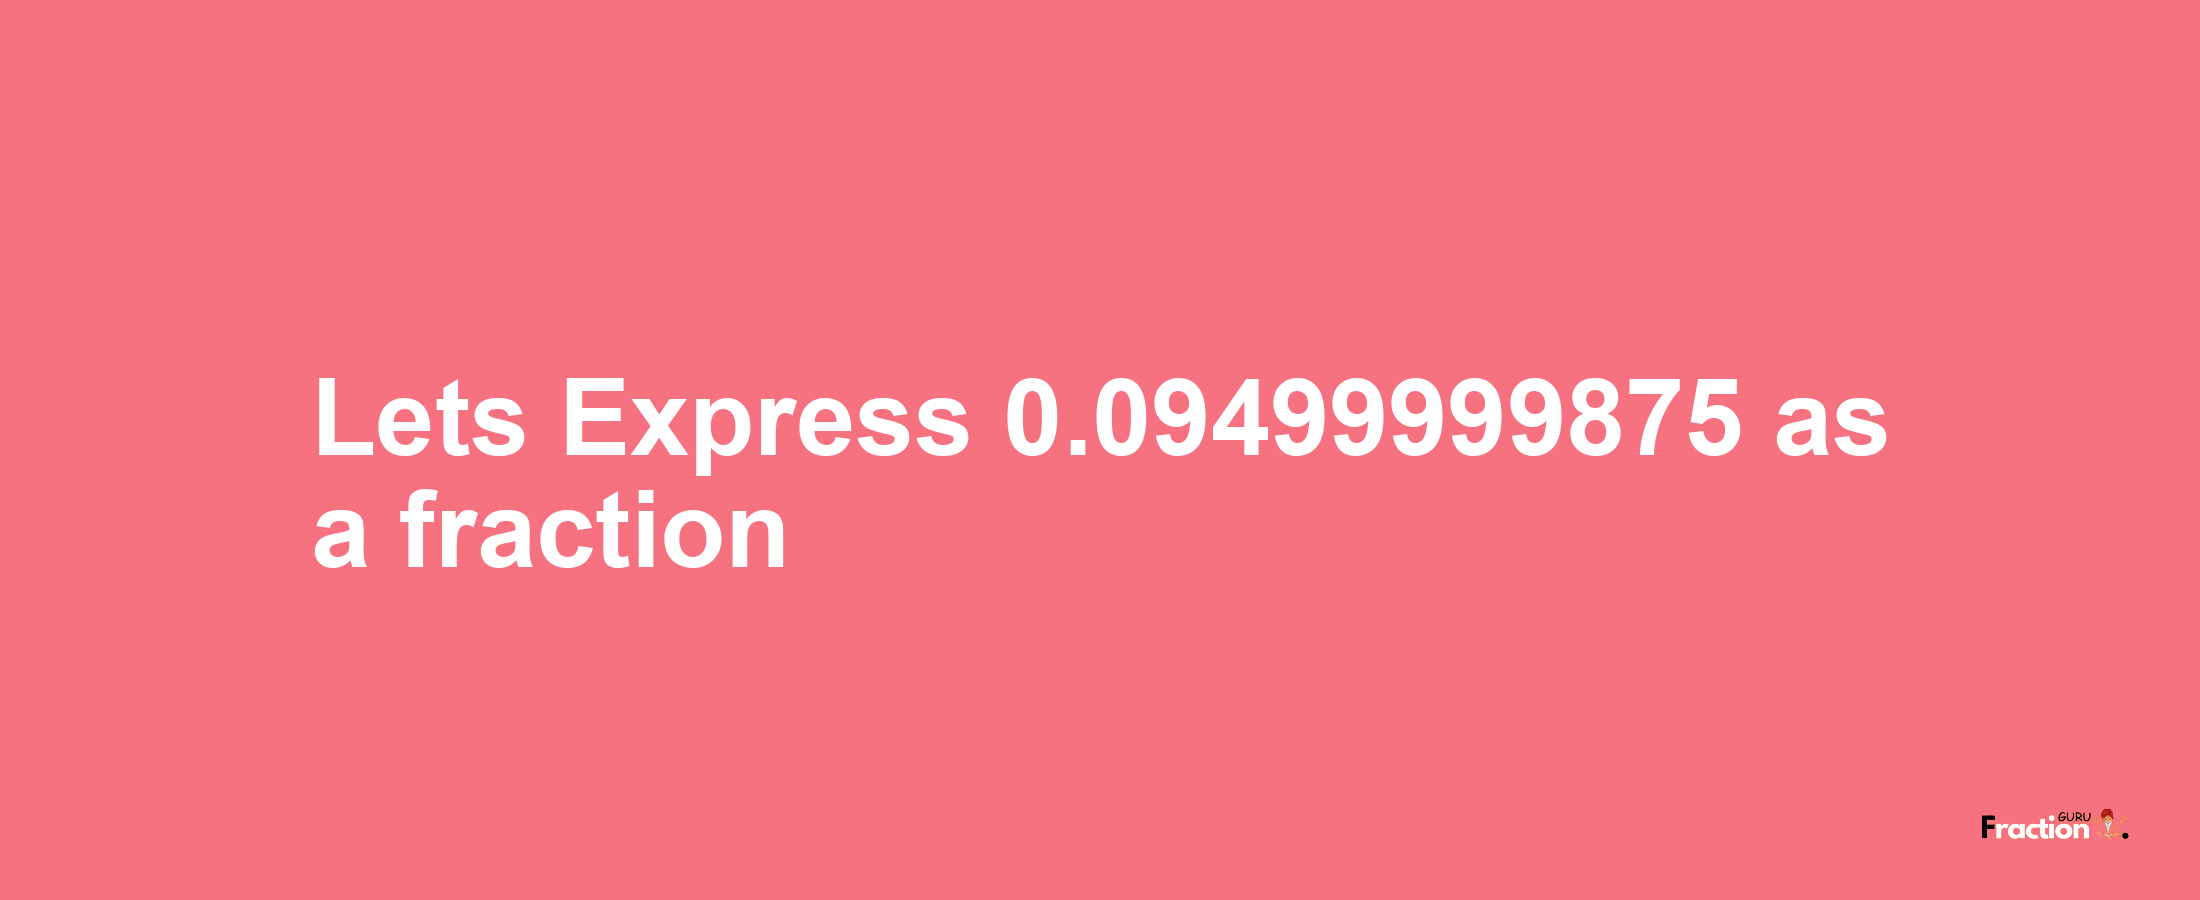 Lets Express 0.09499999875 as afraction